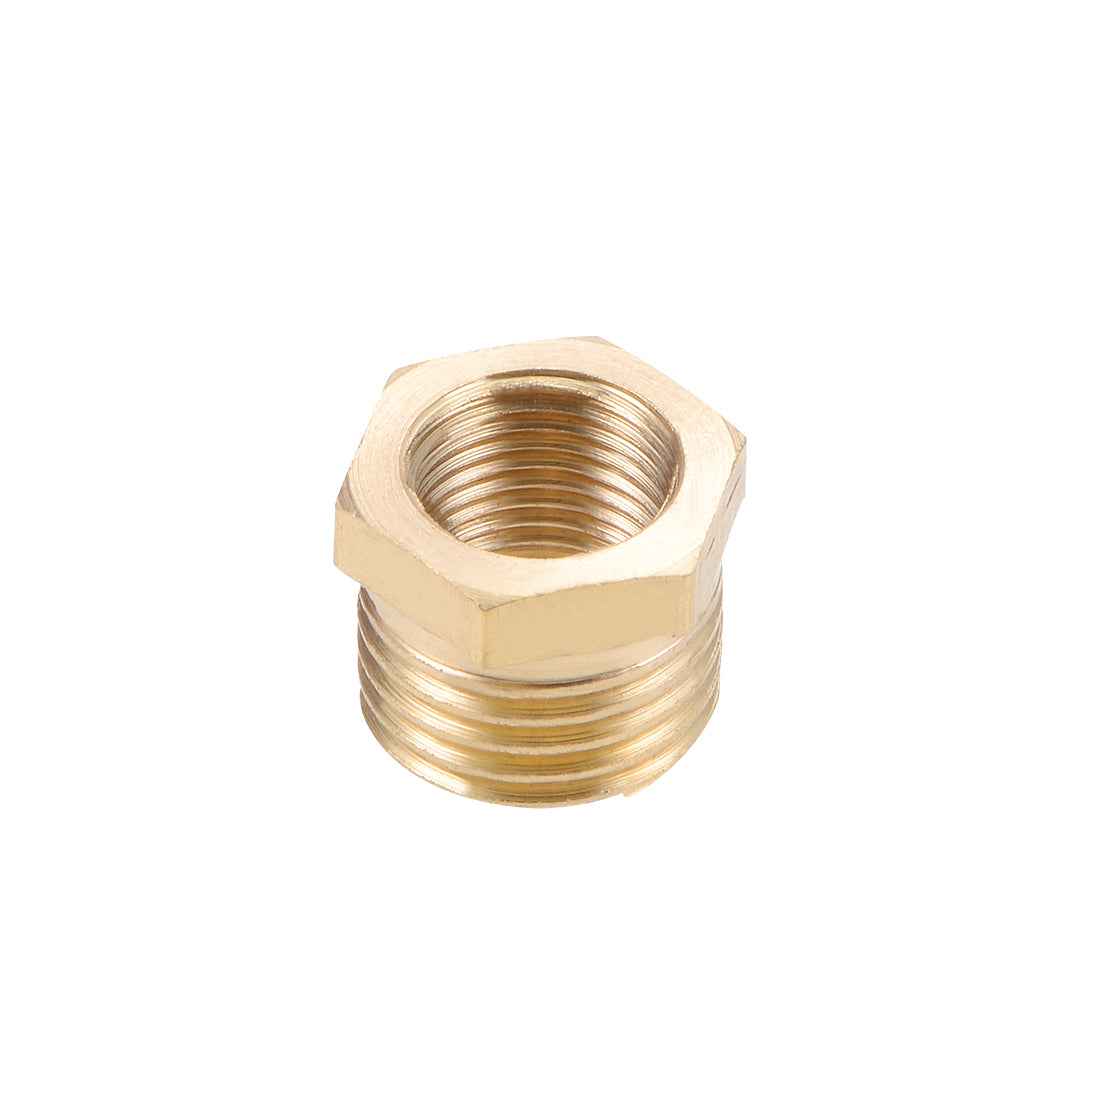 uxcell Uxcell Brass Threaded Pipe Fitting G1/4 Male x G1/8 Female Hex Bushing Adapter 5pcs